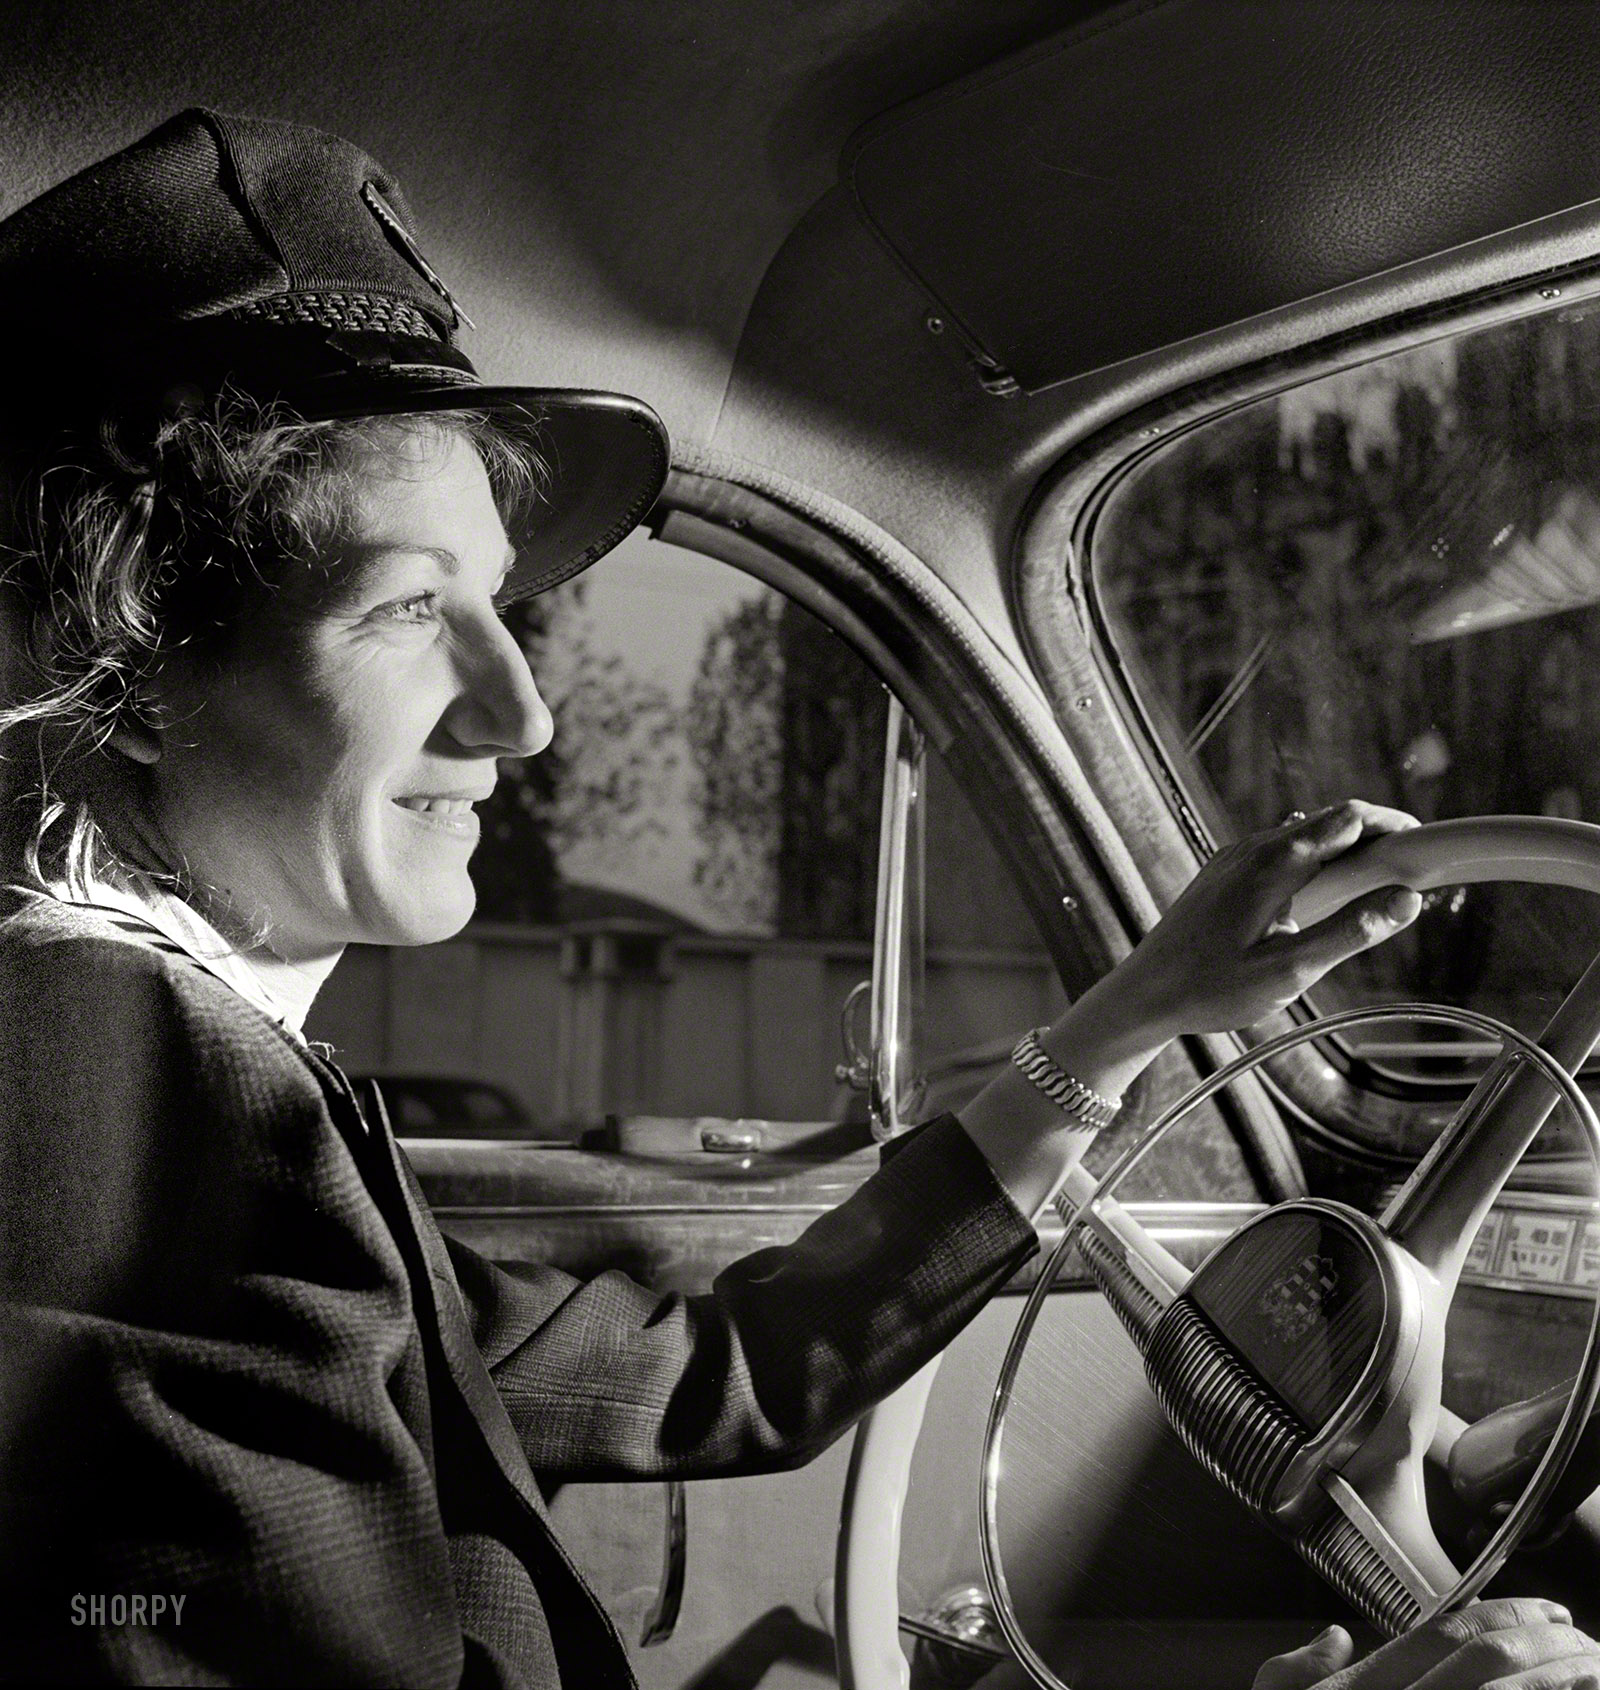 November 1942. Salt Lake City, Utah. "Training women to operate taxicabs." Photo by Andreas Feininger for the Office of War Information. View full size.